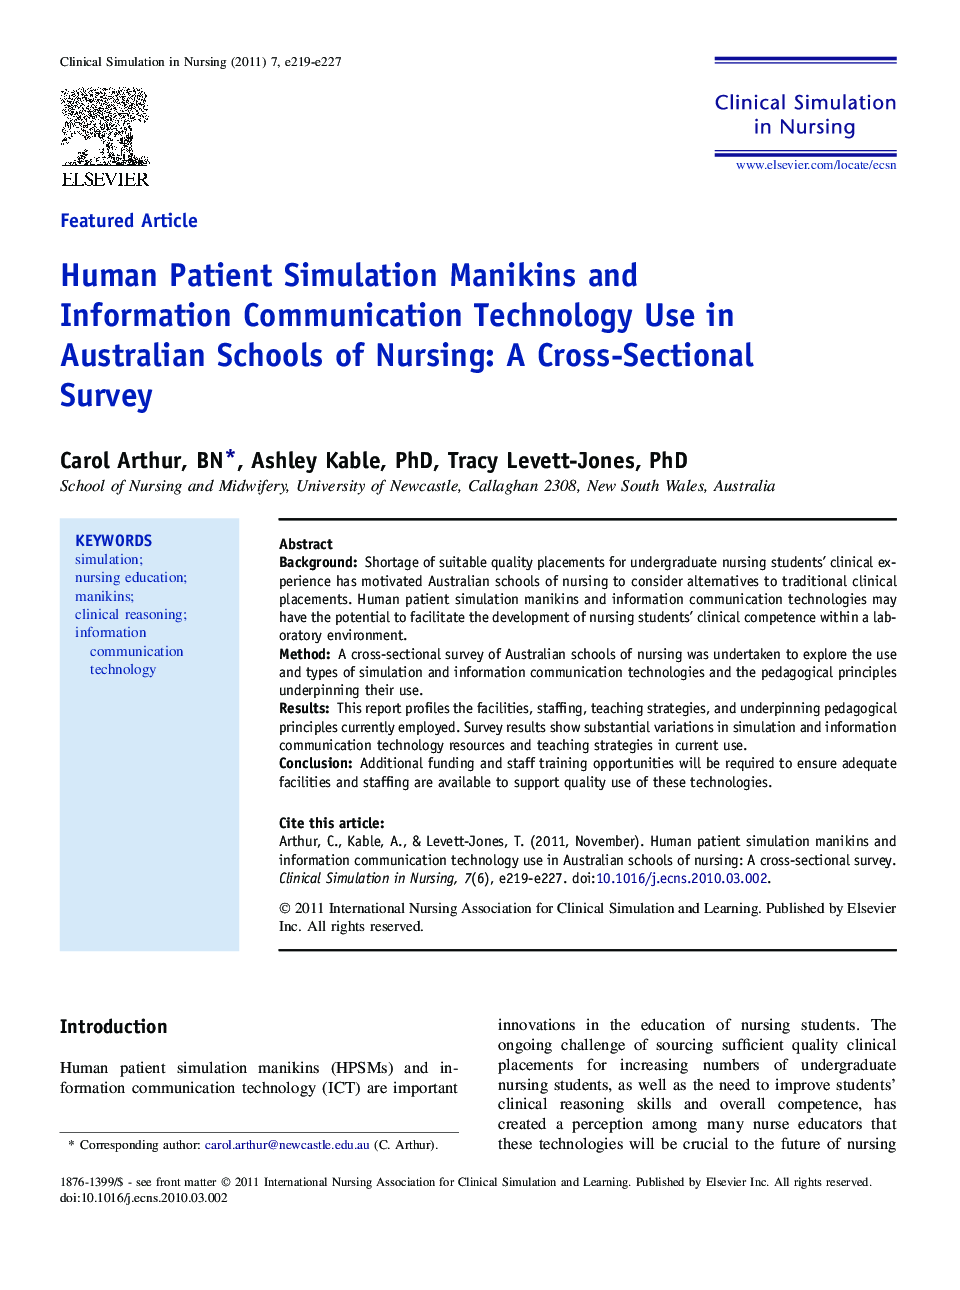 Human Patient Simulation Manikins and Information Communication Technology Use in Australian Schools of Nursing: A Cross-Sectional Survey